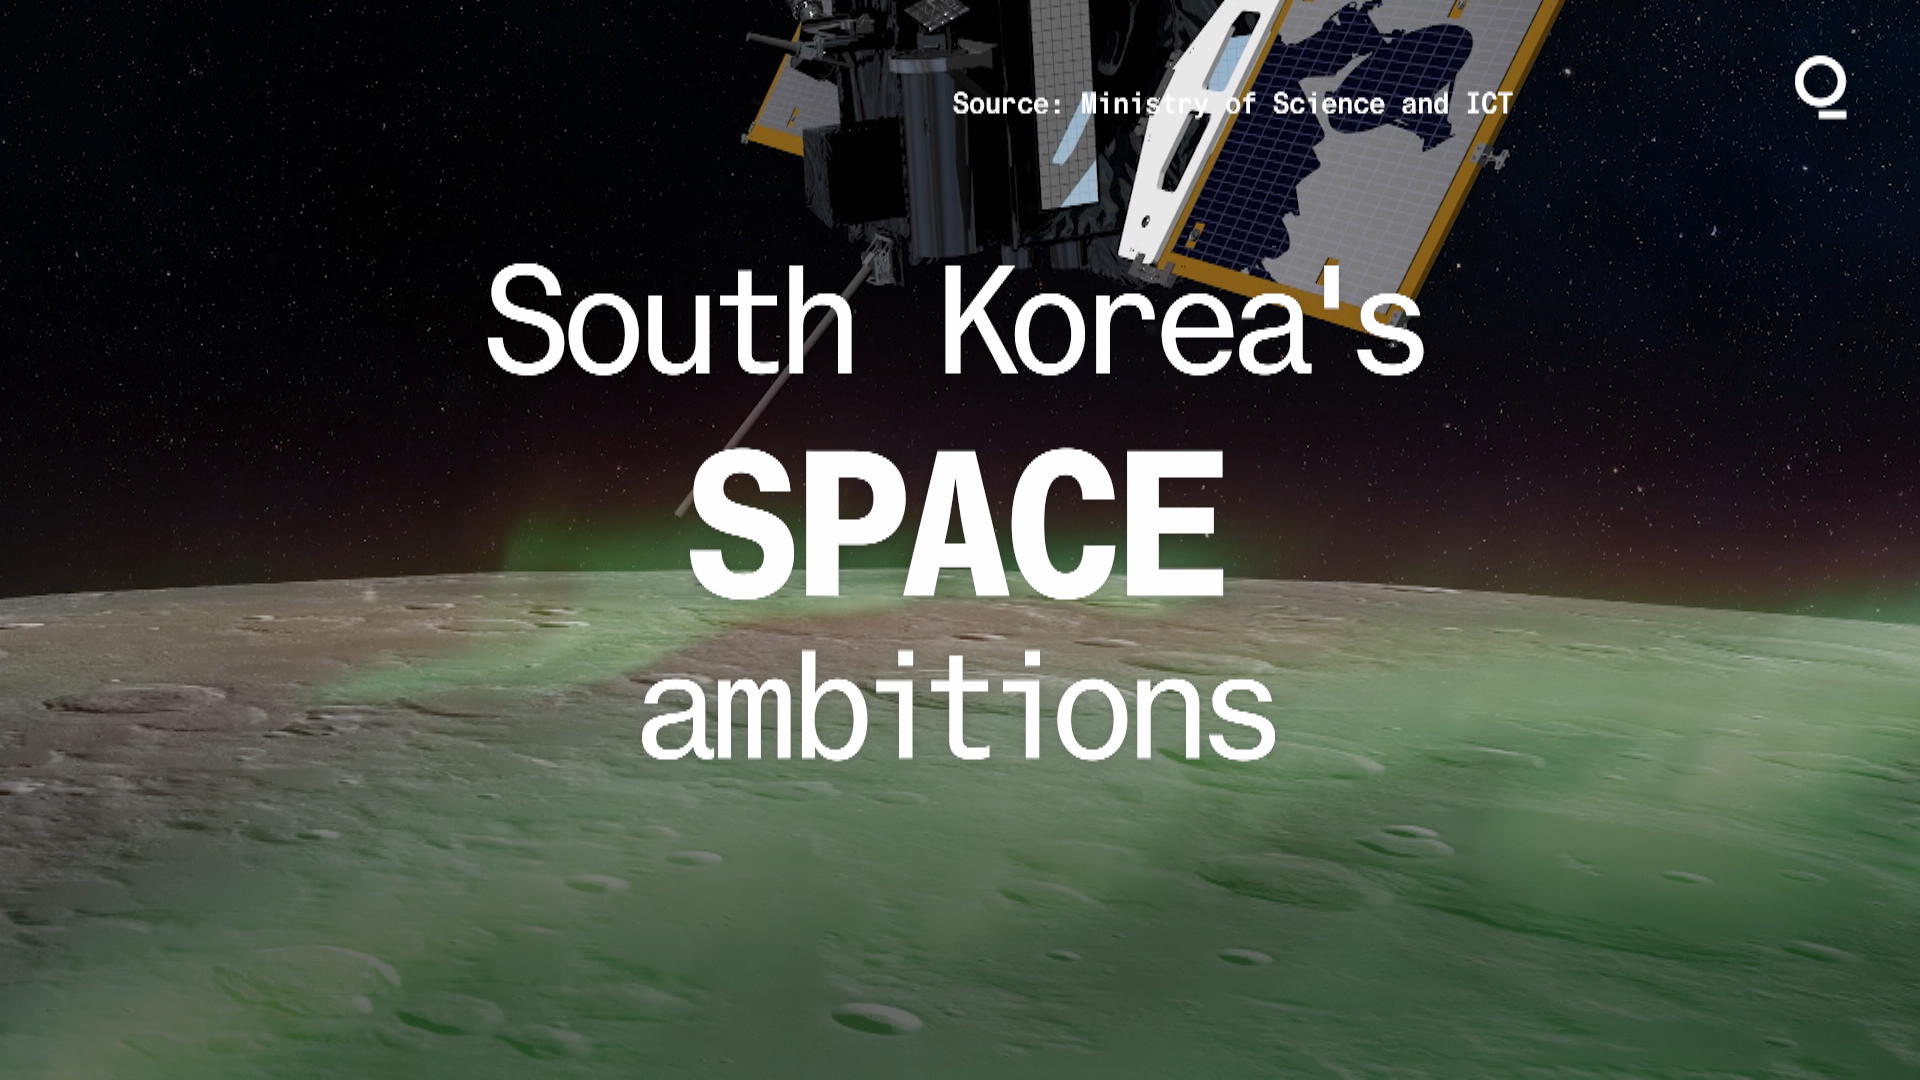 6G And Moon: South Korea’s Space Program Set for Major Boost